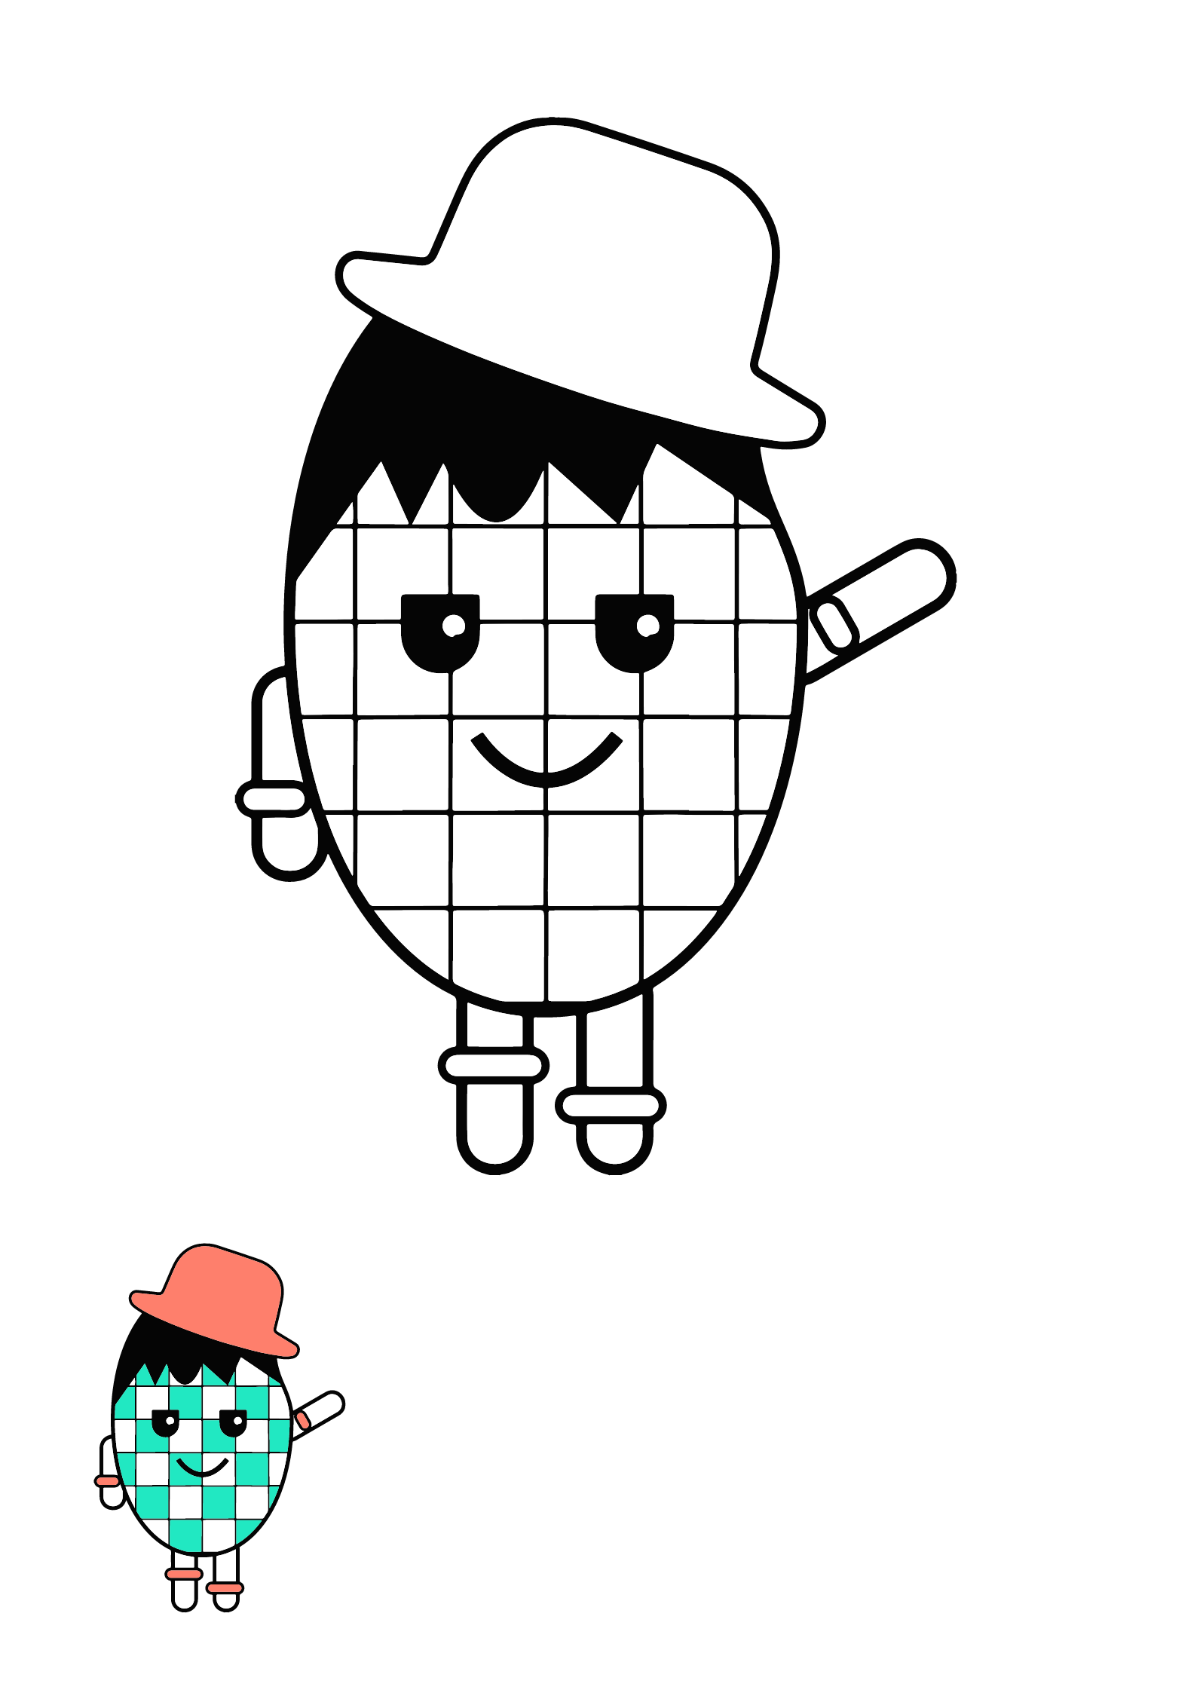 Character Checkered Flag Coloring Page